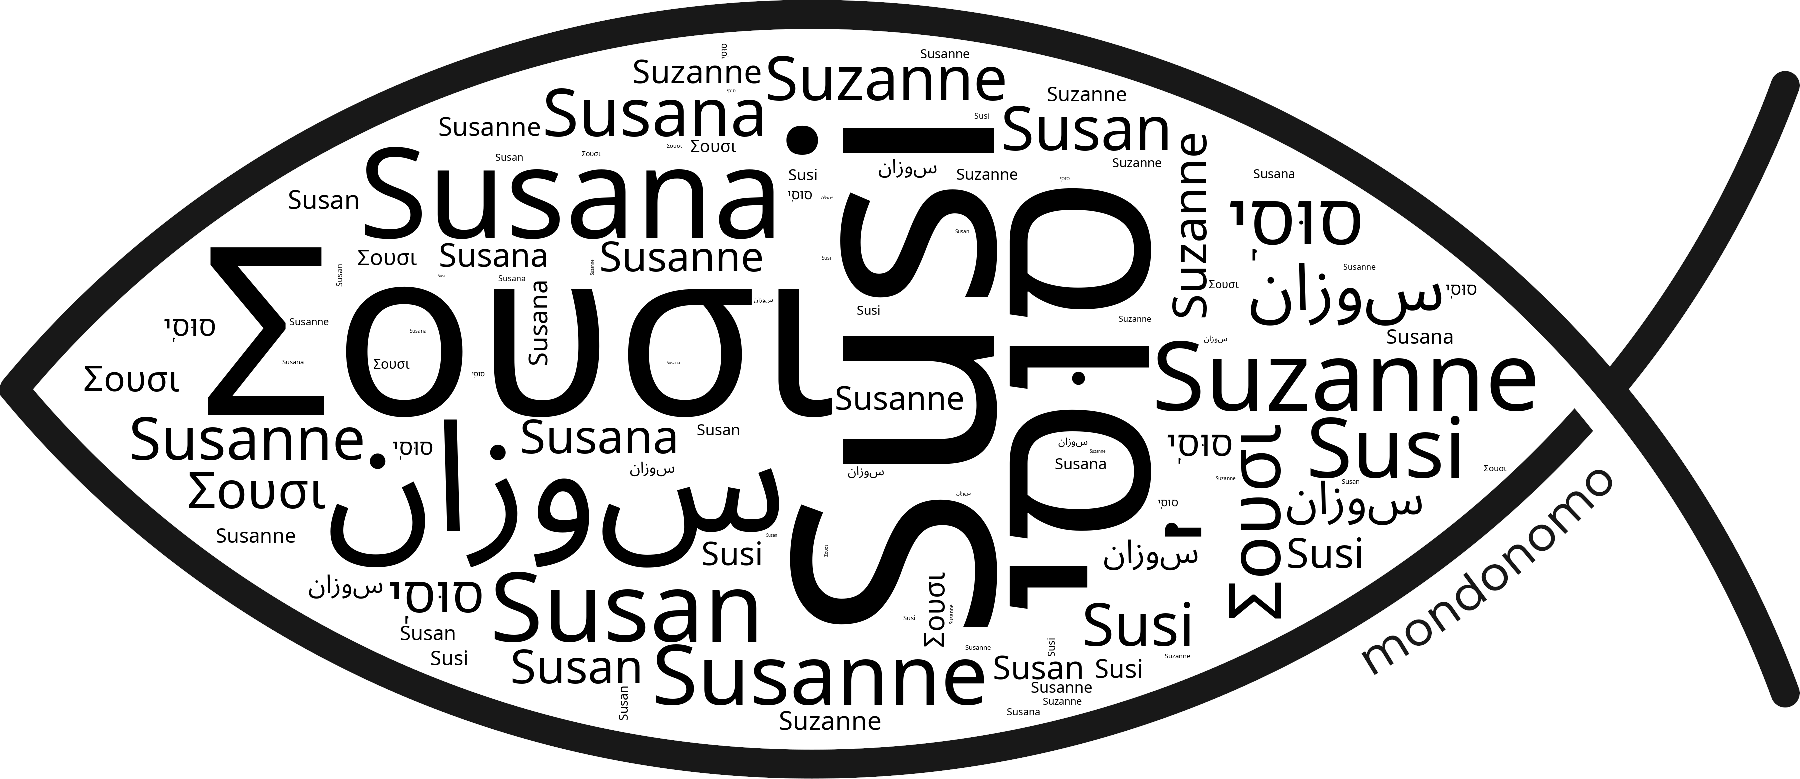 Name Susi in the world's Bibles